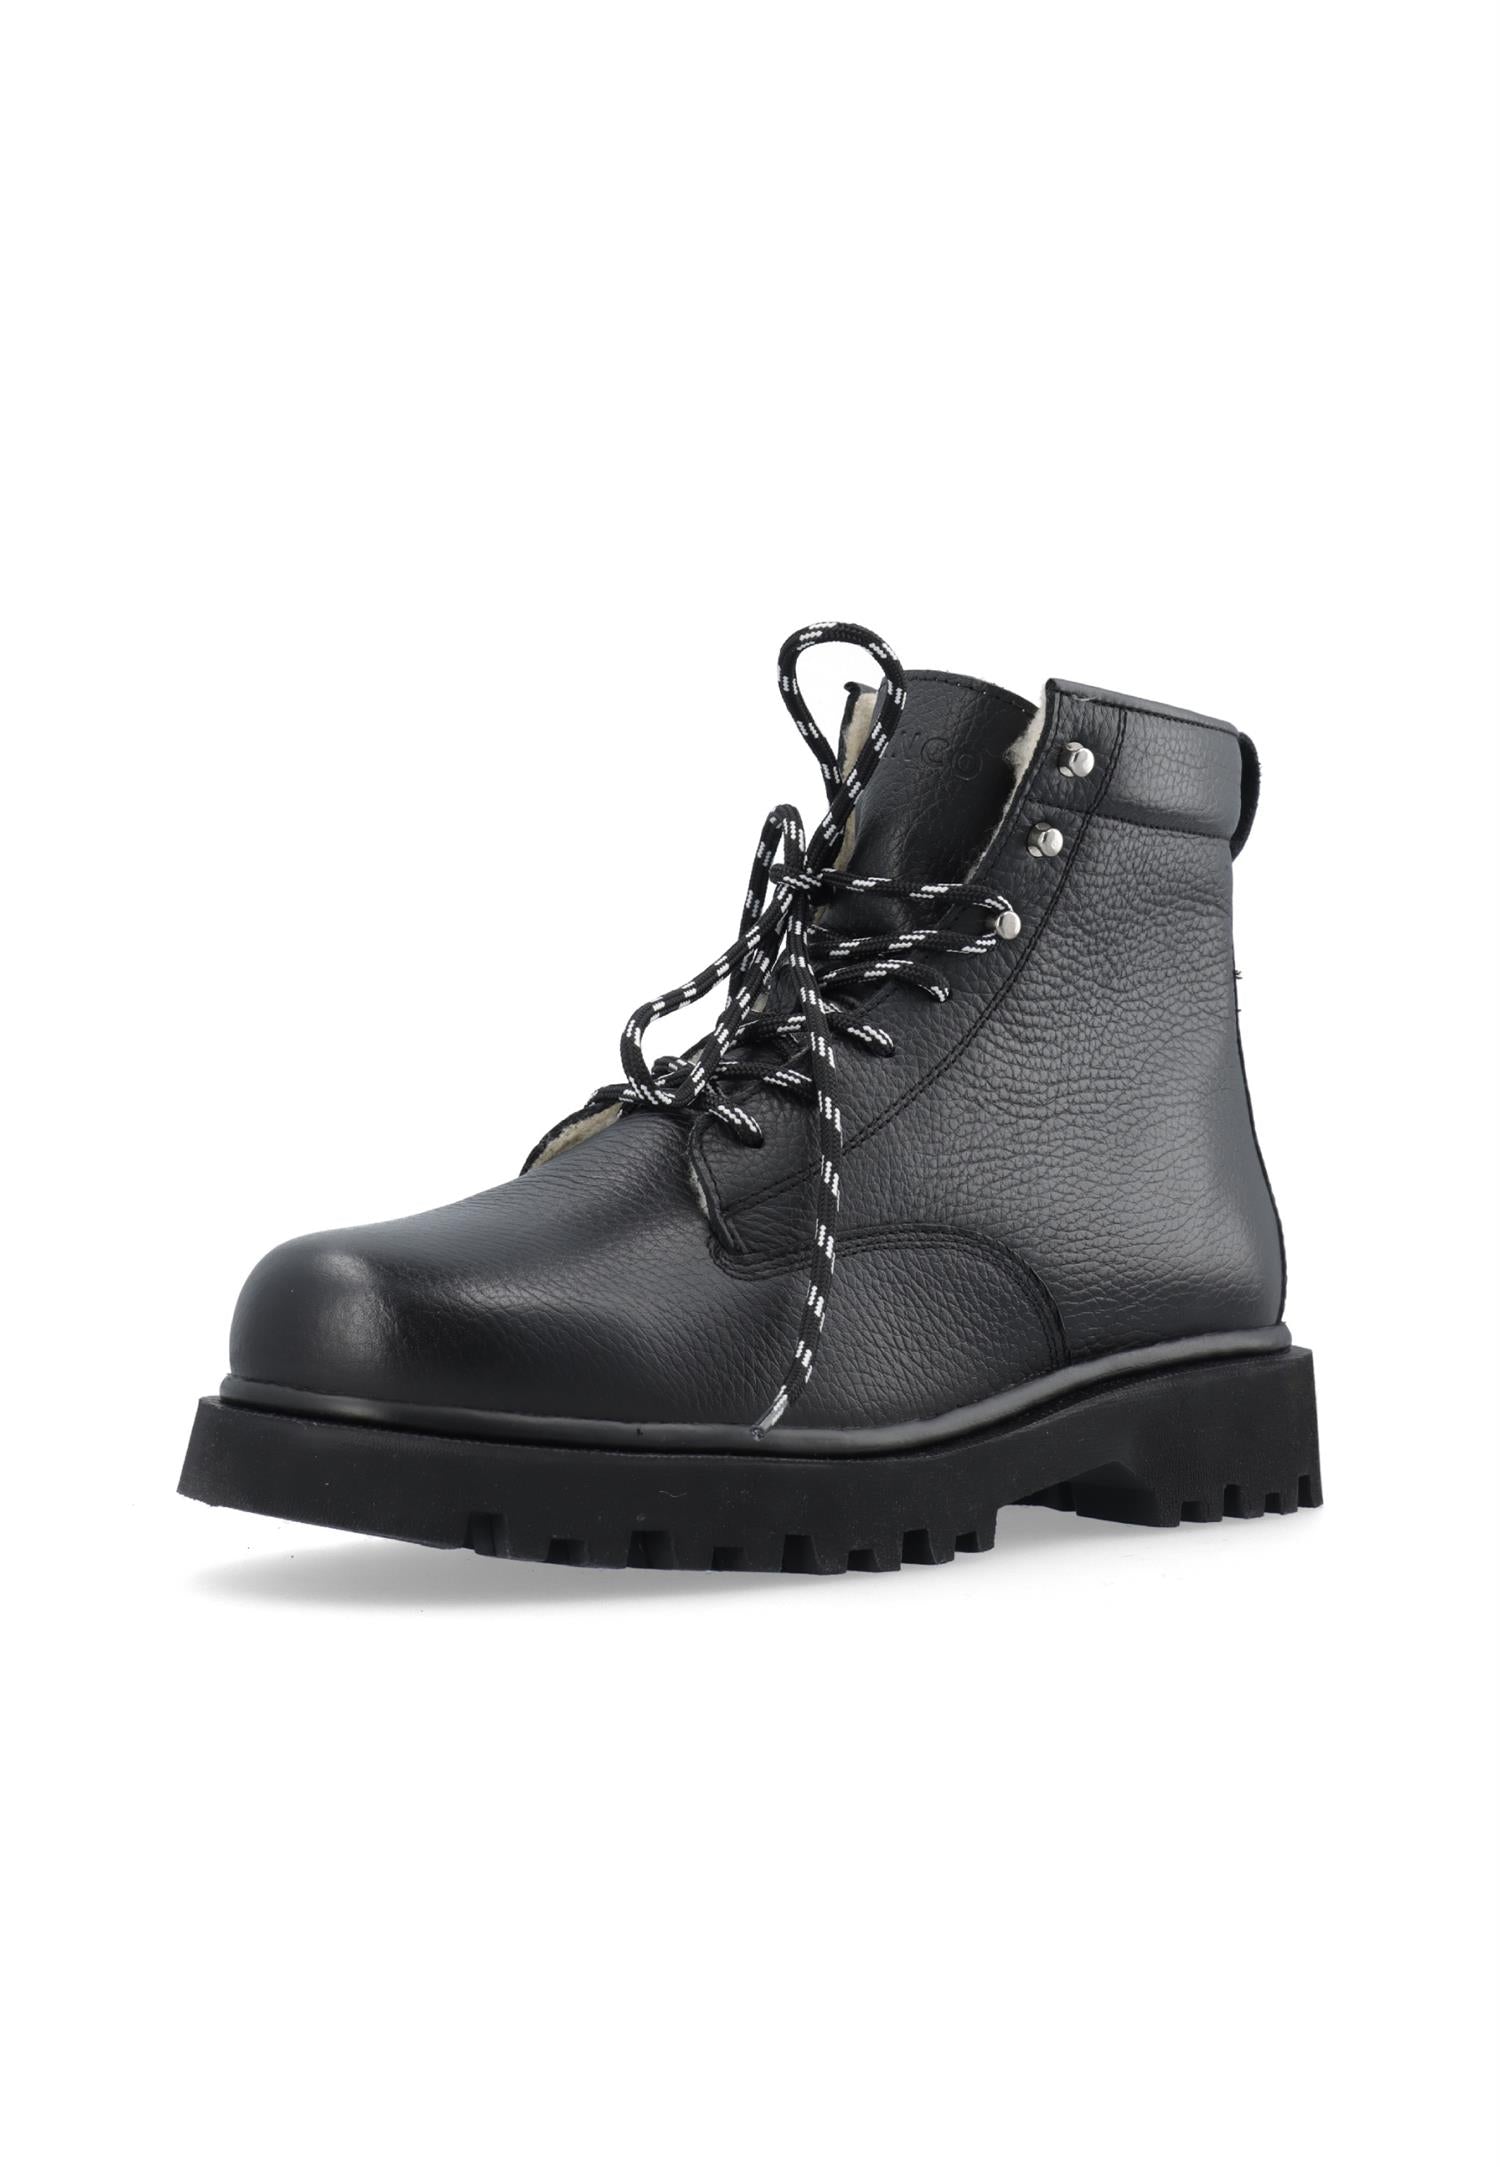 BIAPATRICK Laced Up Boot Black